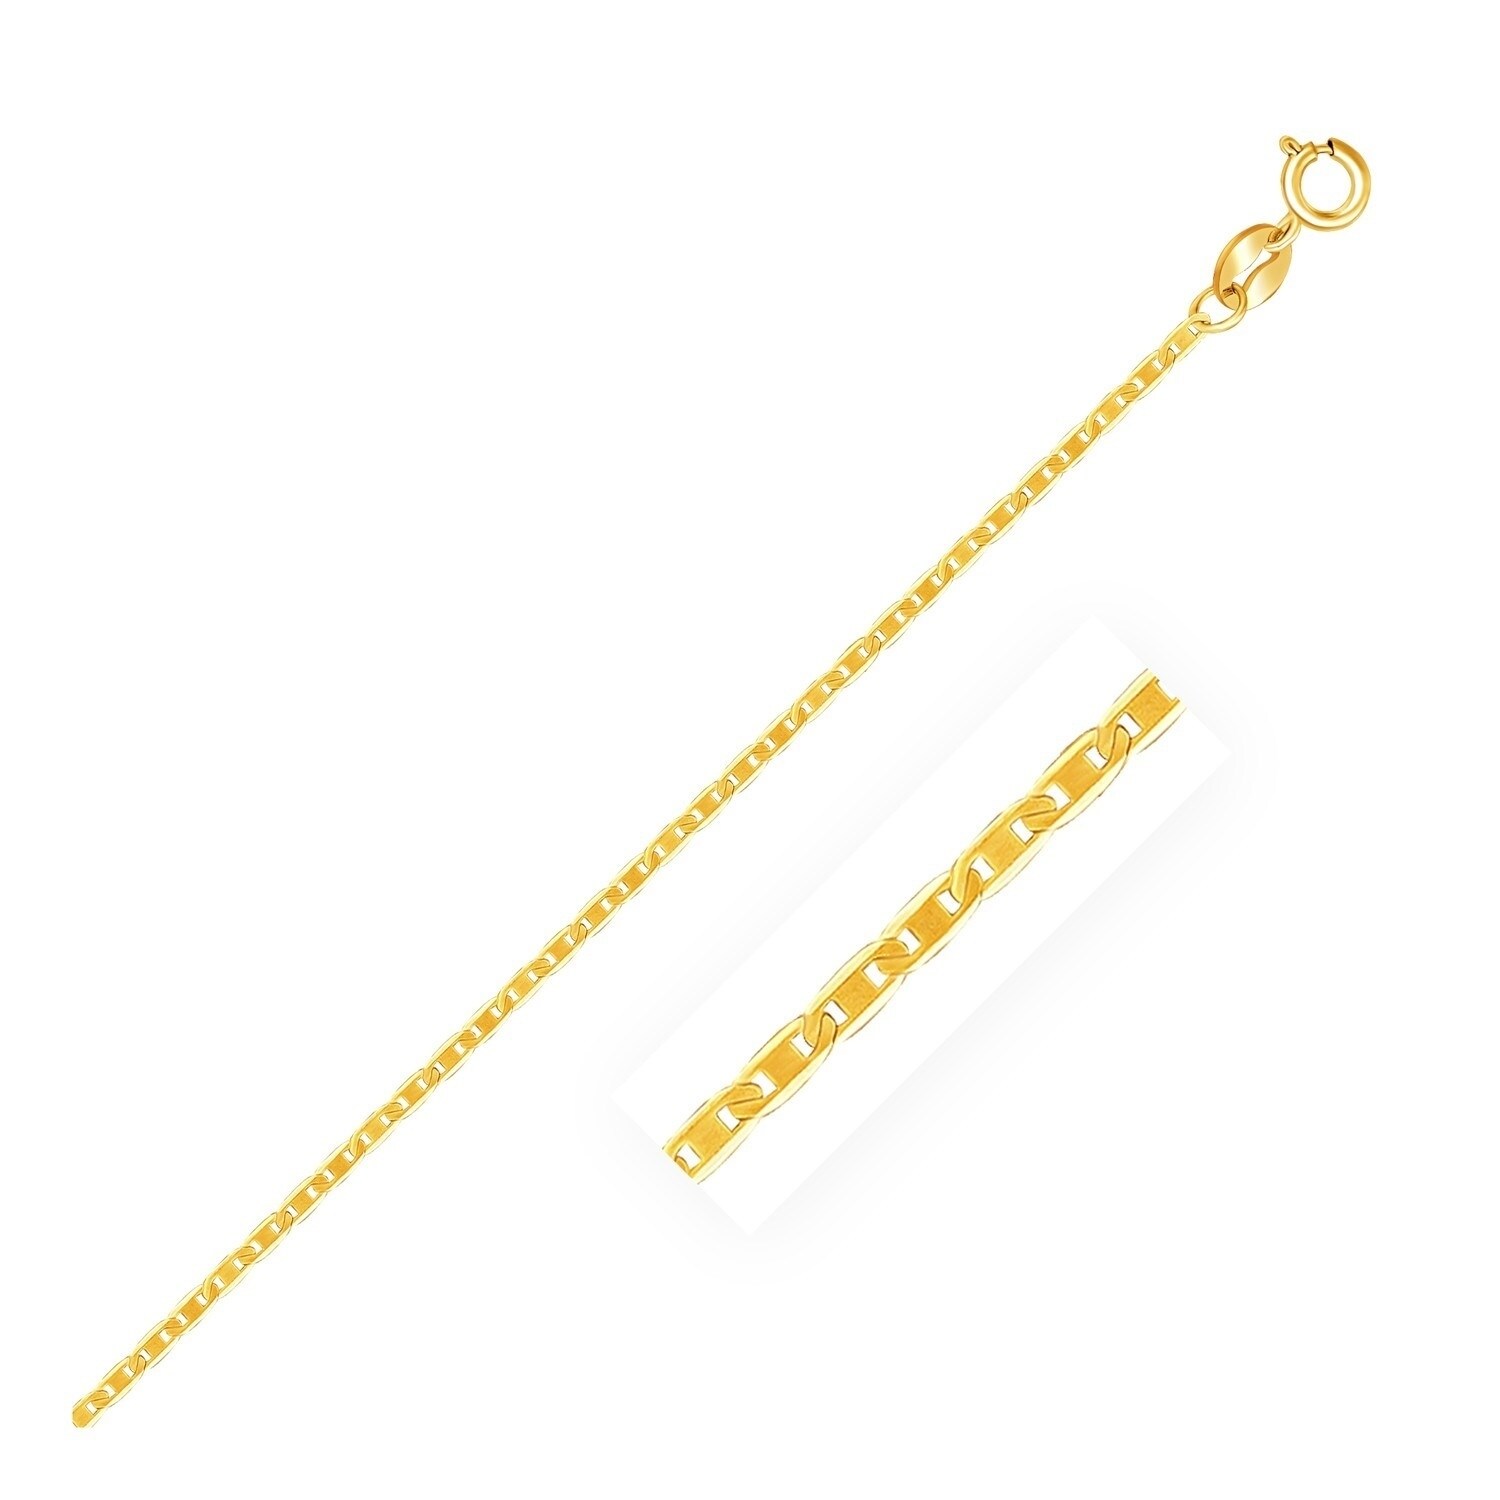 Spring-ring 10K Yellow Gold 18/" Box Chain 1.3 grams 0.7mm wide